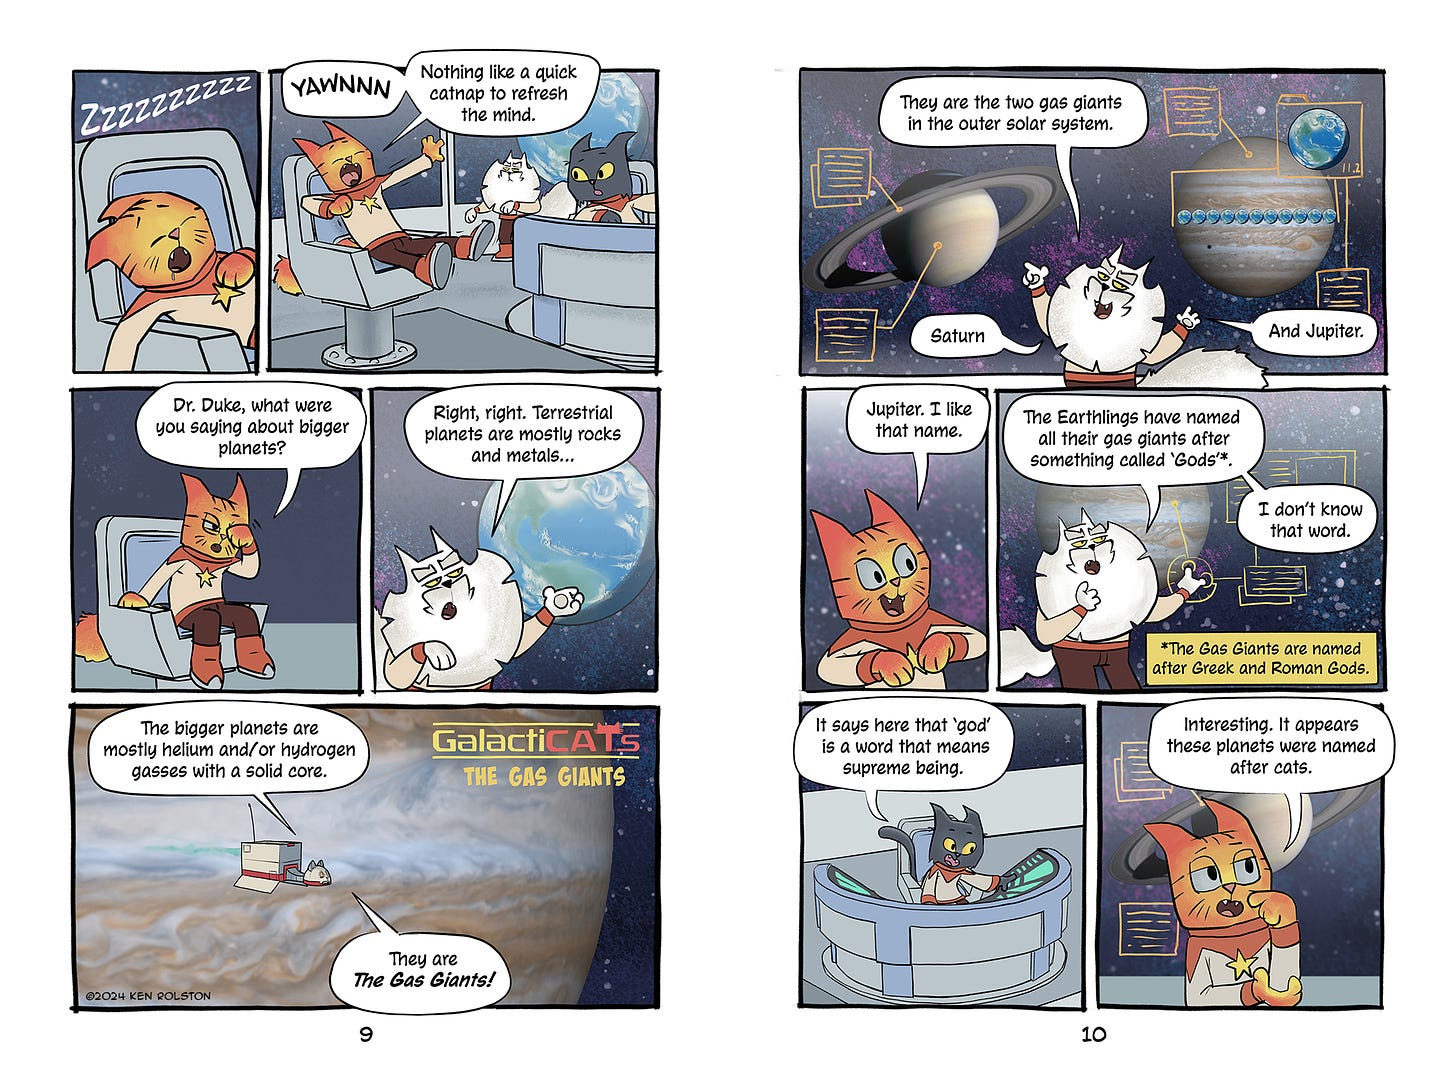 Panel 1 - Captain Red sleeps in his command chair. Zzzzzzzzzz Panel 2 - He wakes and stretches, “YAWNNNN - Nothing like a quick cat nap to refresh the mind.” Panel 3 - Red says: Dr. Duke, what were you saying about bigger planets?  Panel 4 - Dr. Duke points at the display of the planet Earth and says: Right, right… Terrestrial planets are mostly rocks and metals… Panel 5 - The ship flies past Jupiter a voice from within continues: The bigger planets are mostly helium and/or hydrogen gasses with a solid core. They are the Gas Giants! Narrator: GalactiCATs - The Gas Giants Page 2 Panel 1 - Duke stands in front of the big display Saturn and Jupiter are on screen with data only the cats can read. He says: They are the two gas giants in the outer solar system. Saturn. And Jupiter. Panel 2 - Captain Red says: Jupiter. I like that name. Panel 3 - Dr Duke, puzzled, says: The Earthlings have named all their gas giants after something called “gods”*. I don’t know that word. Narrator - The Gas Giants are named after Greek and Roman Gods. Panel 4 - Number One looks at her display: It says here that ‘god’ is a word that means supreme being. Panel 5 - Captain Red: Interesting. It appears these planets were named after cats.